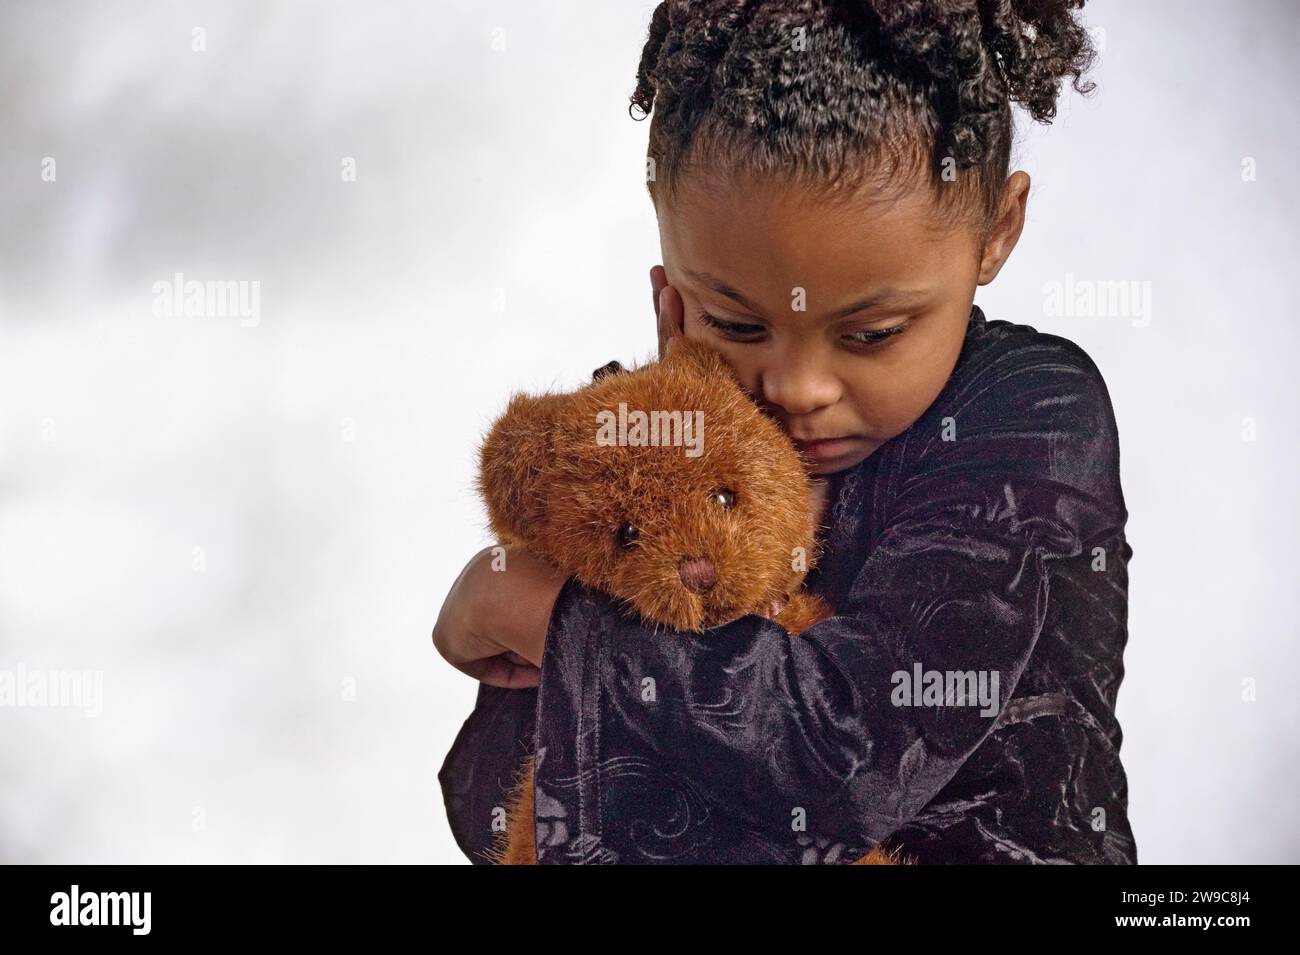 A l very upset ittle African-American girl hugging her teddy bear against a plain background Stock Photo